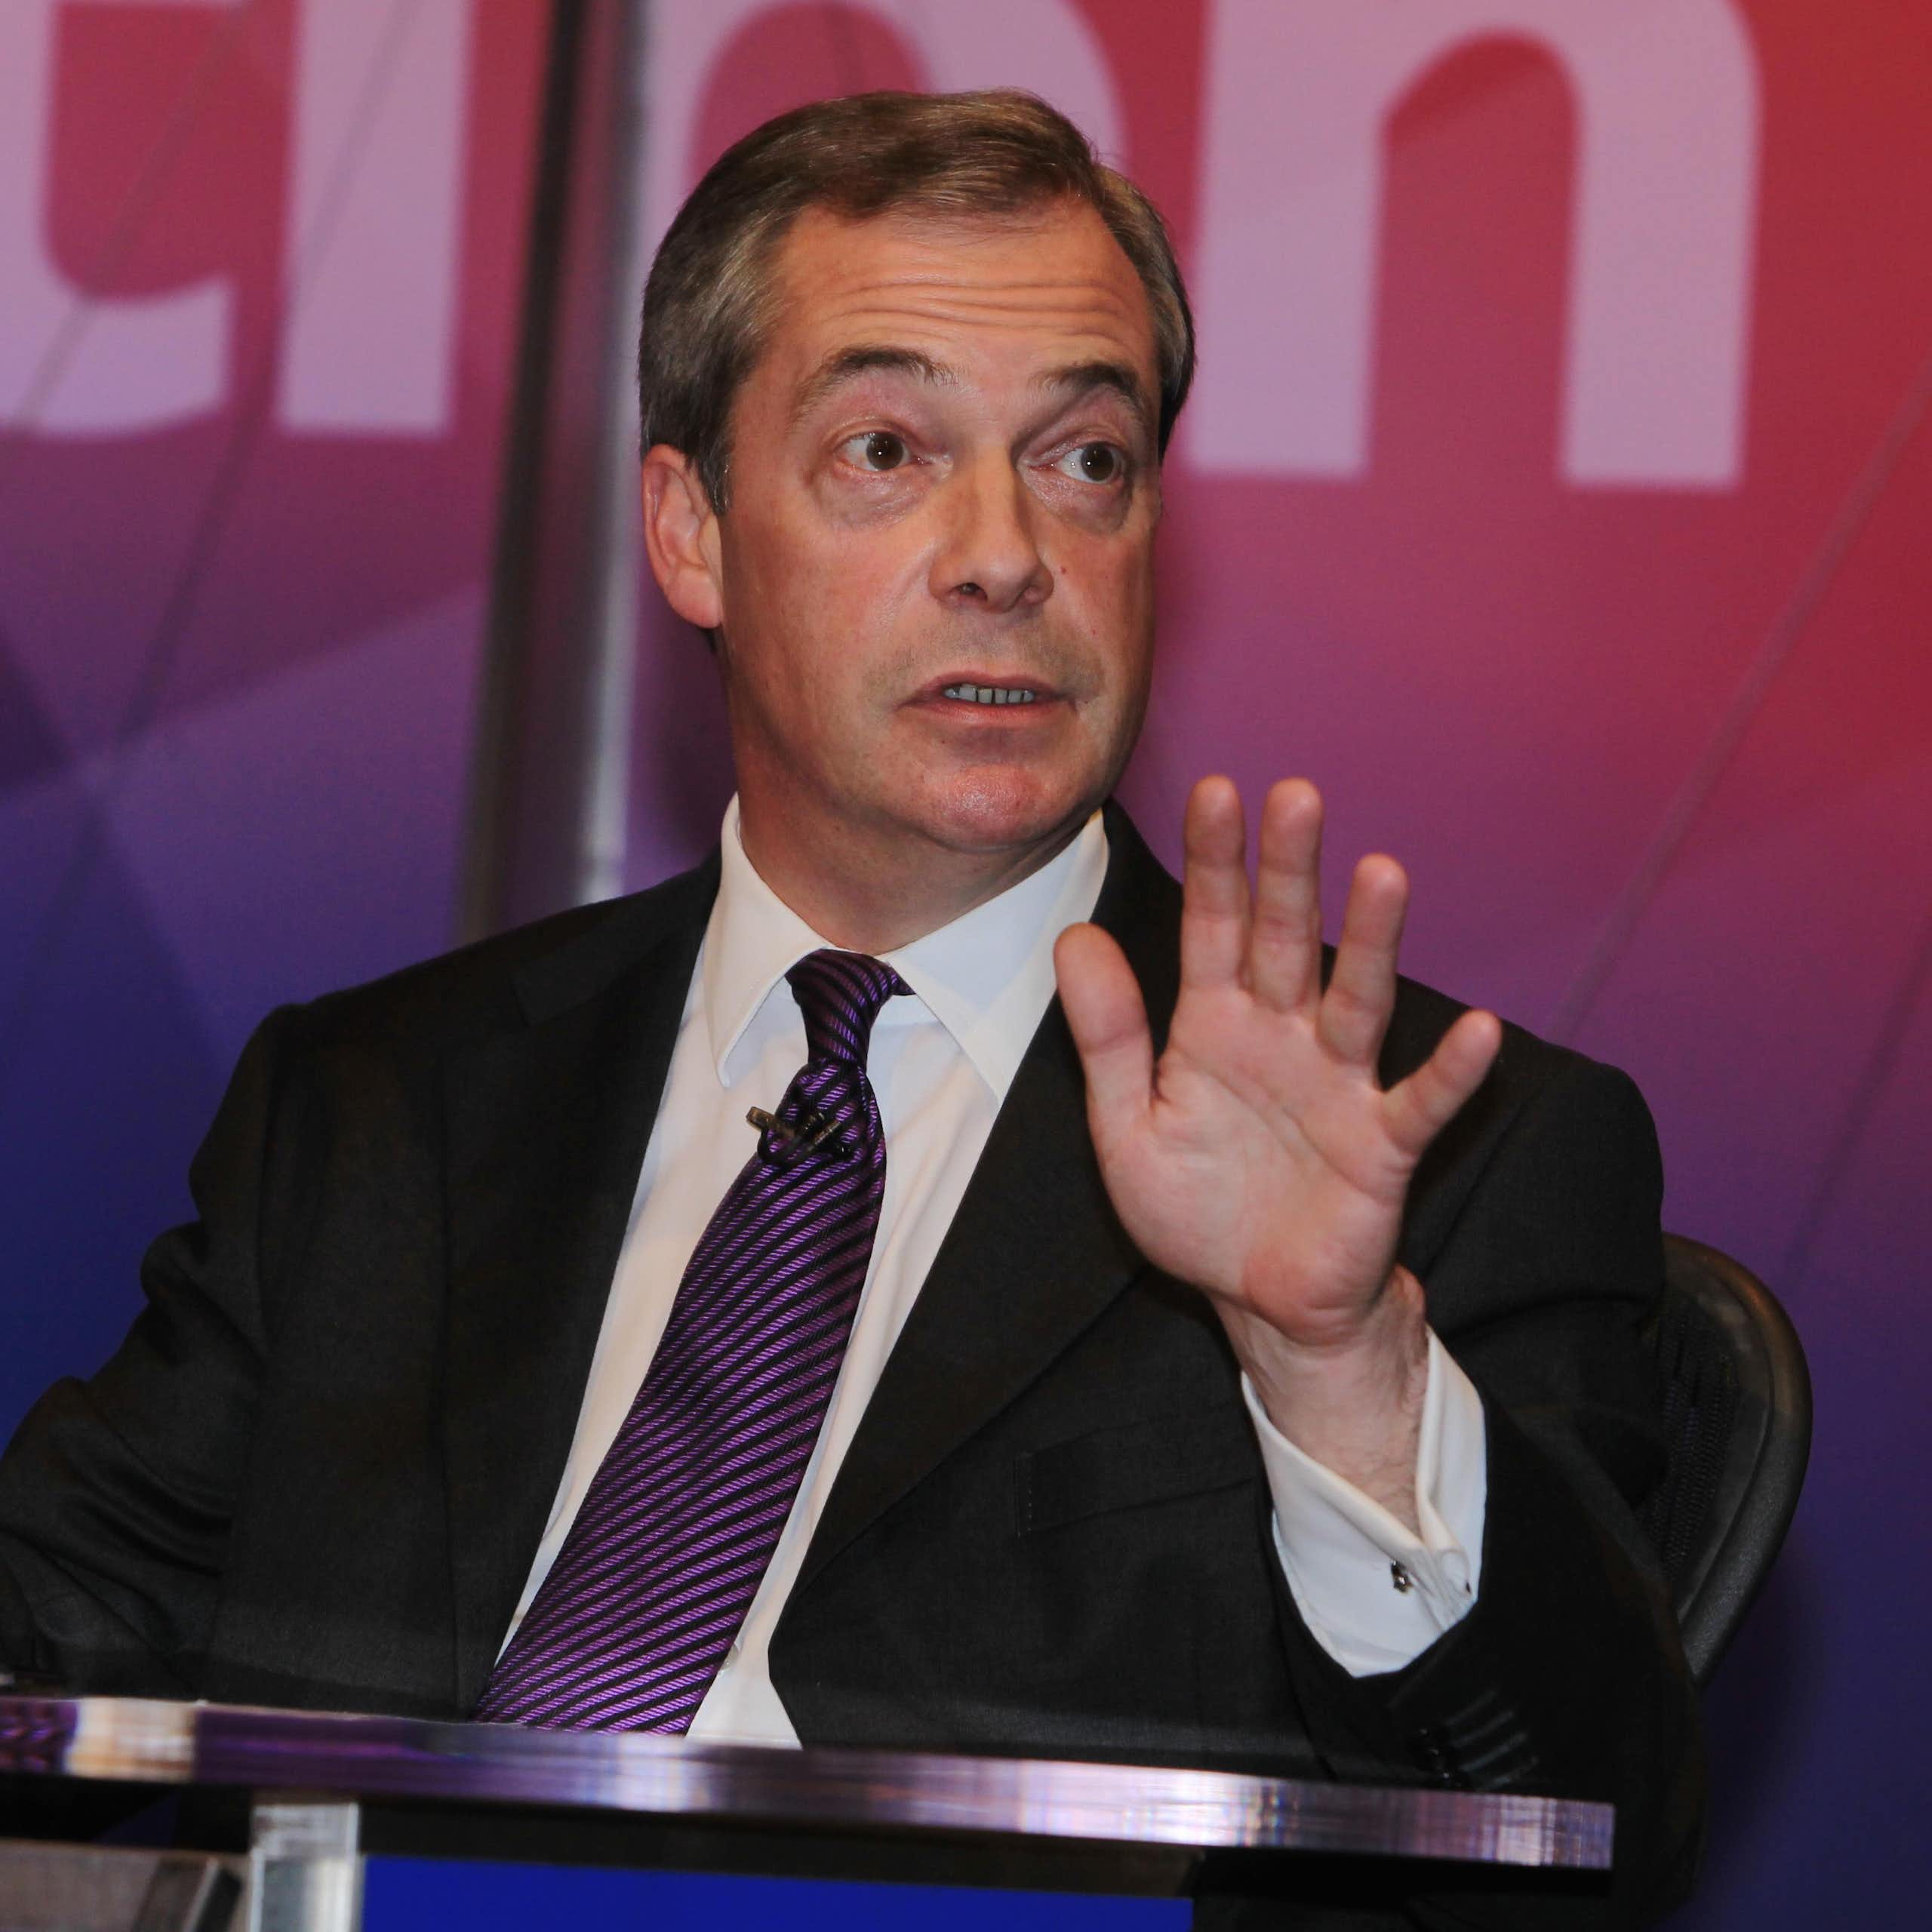 A younger Nigel Farage in 2014 speaking during an appearance on question time